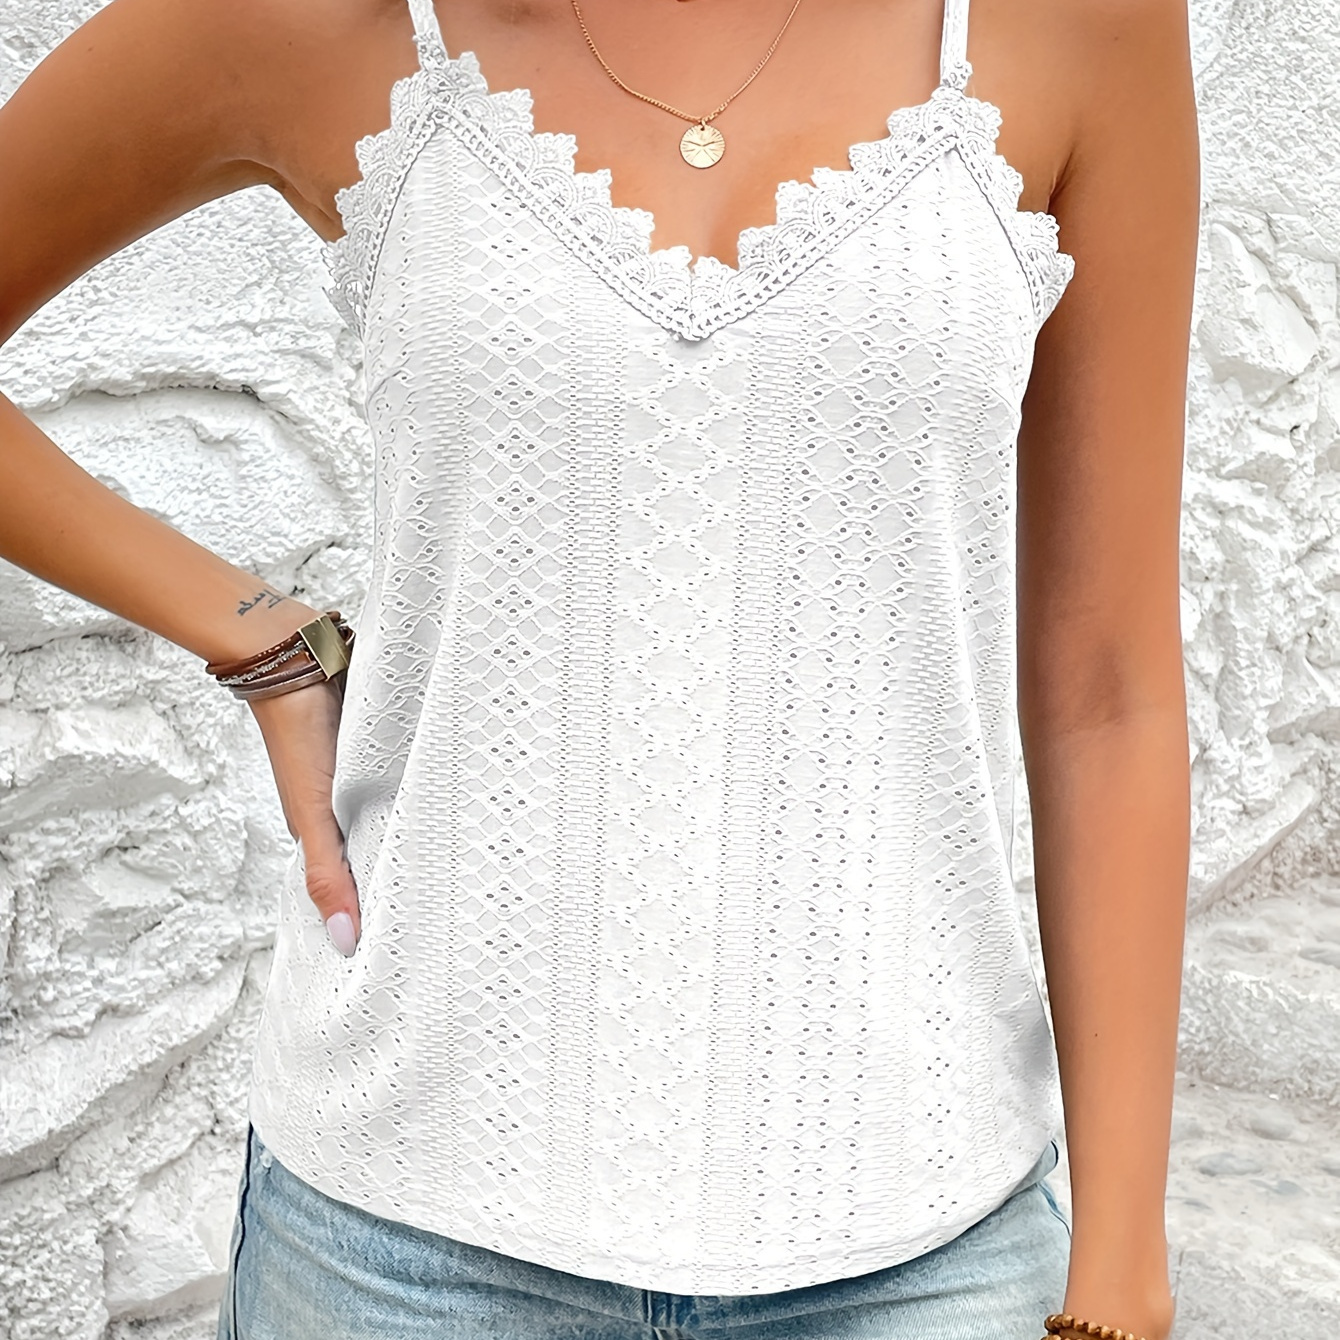 

Eyelet Contrast Lace Cami Top, Casual V-neck Spaghetti Strap Top For Summer, Women's Clothing For Coquette/cute/y2k Style